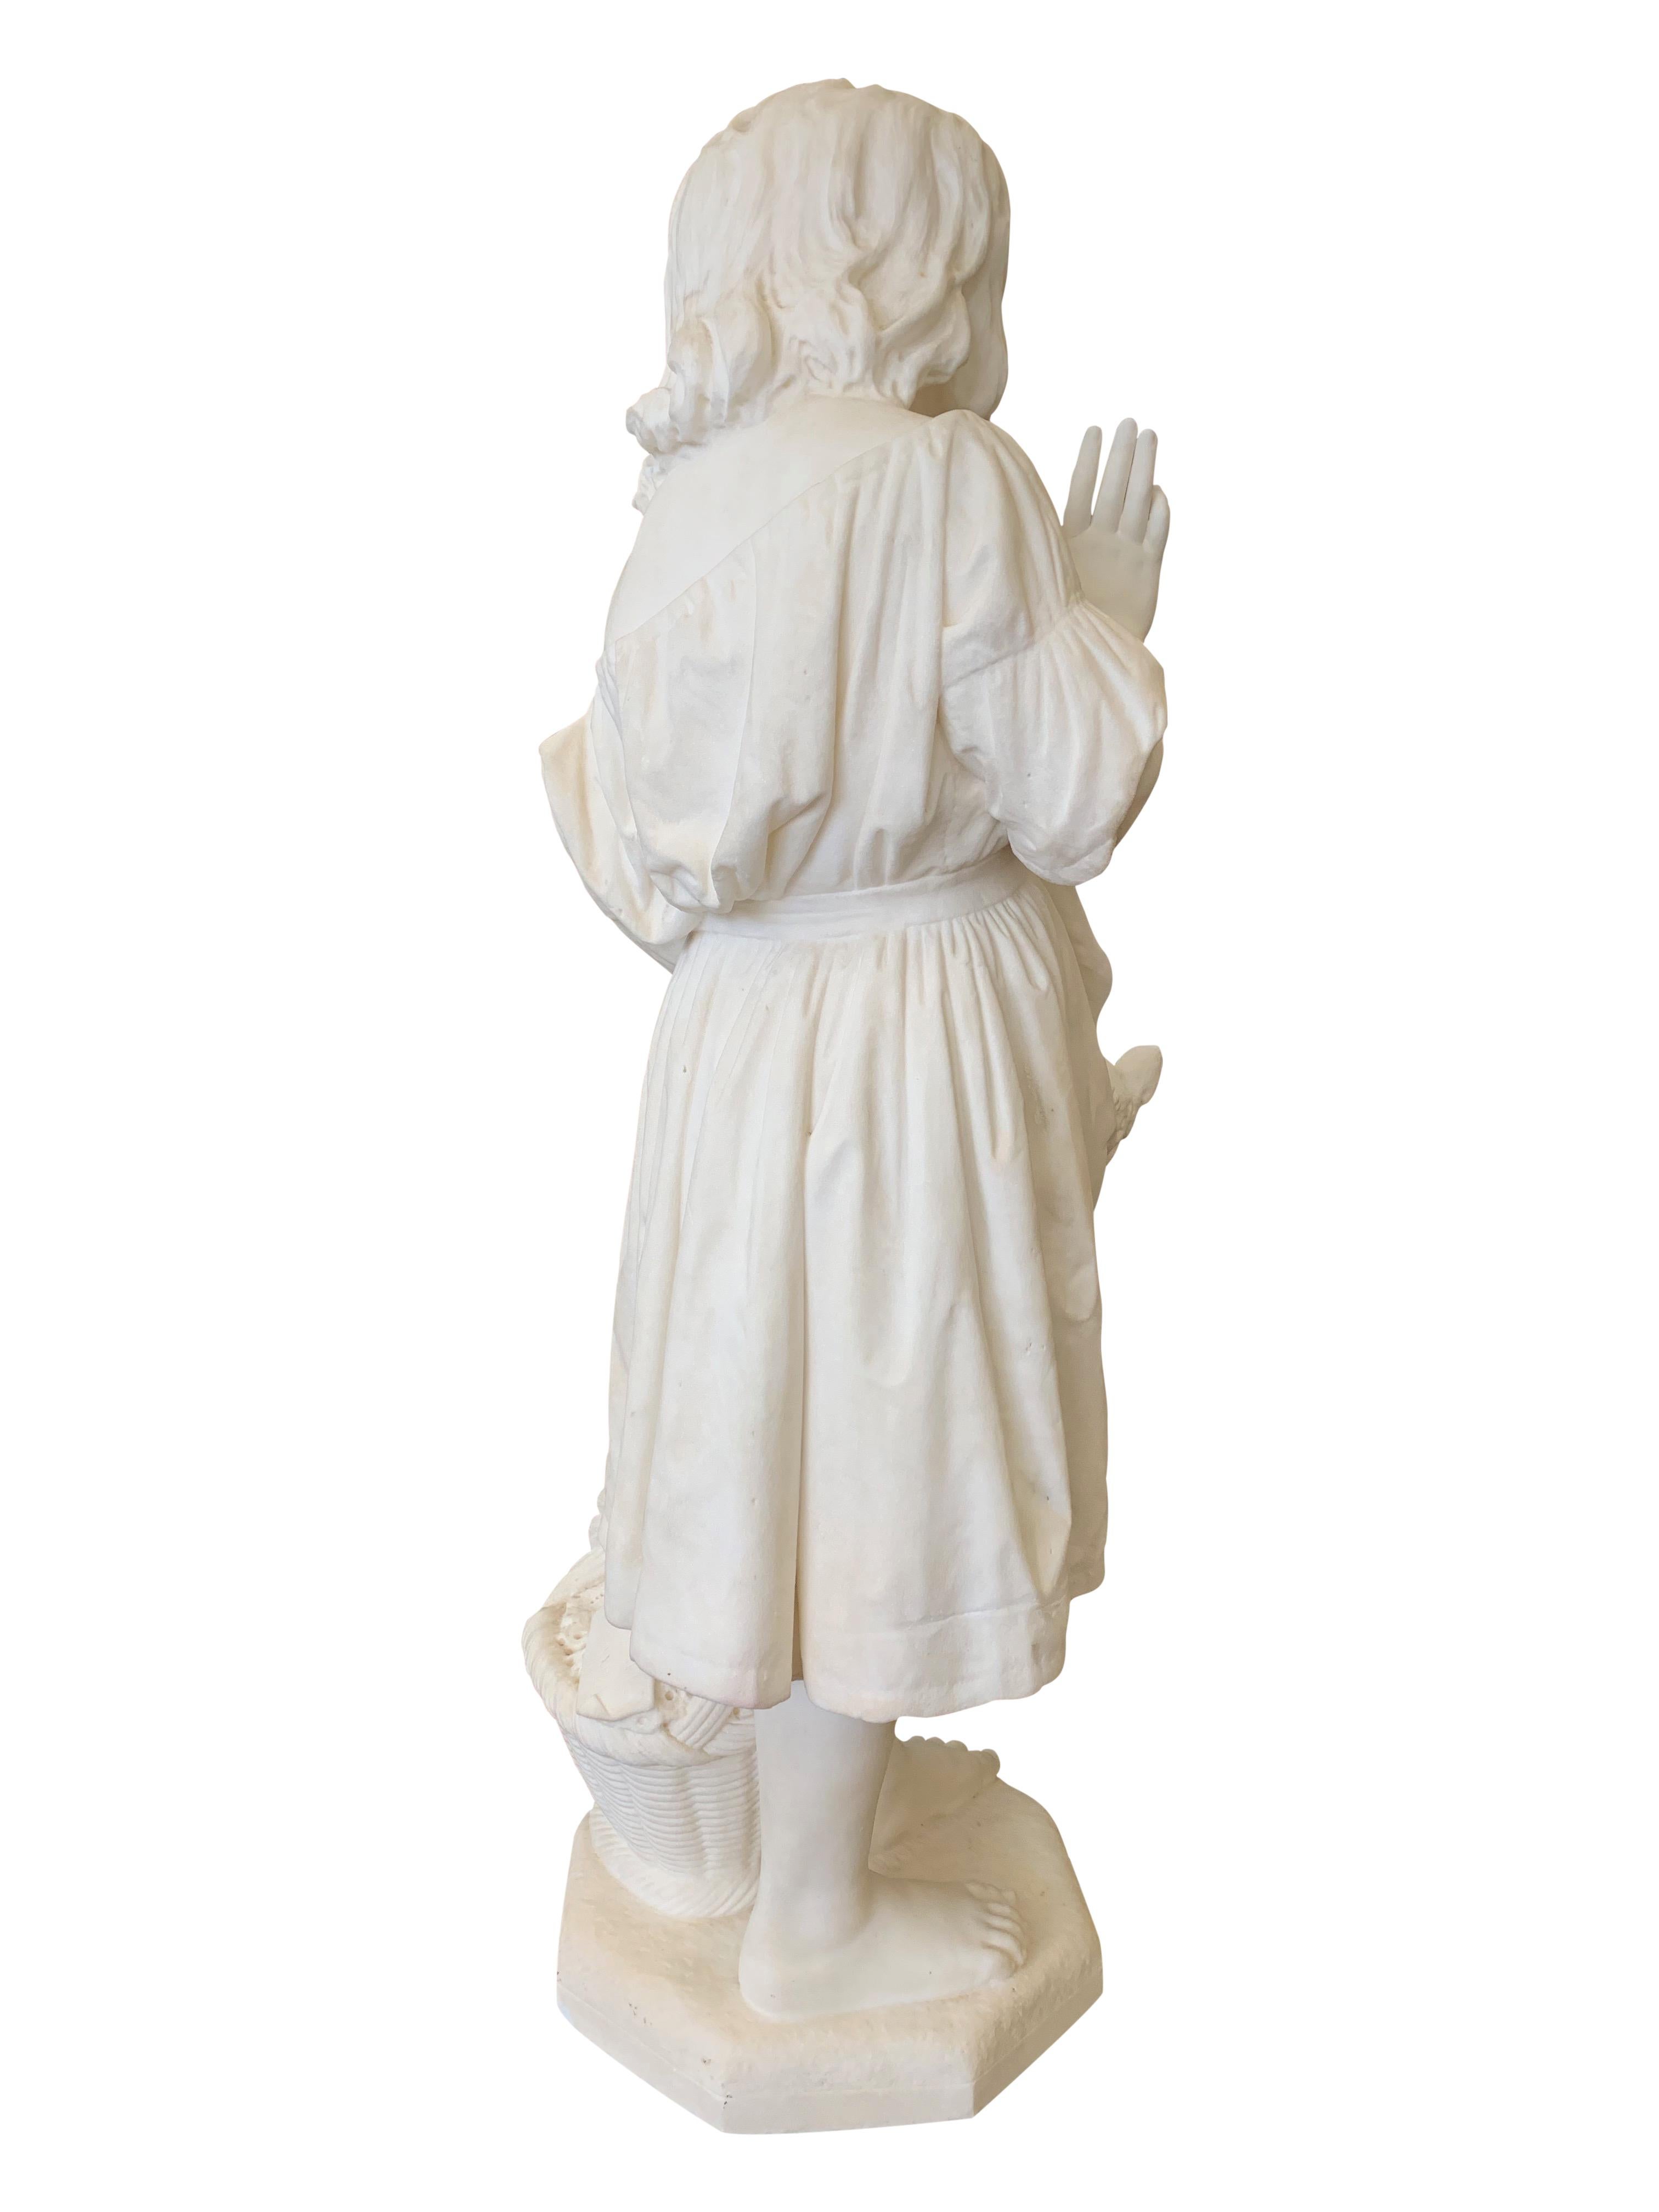 Napoleon III 19th Century Italian Carved Marble Figure of a Young Girl by Caroni For Sale